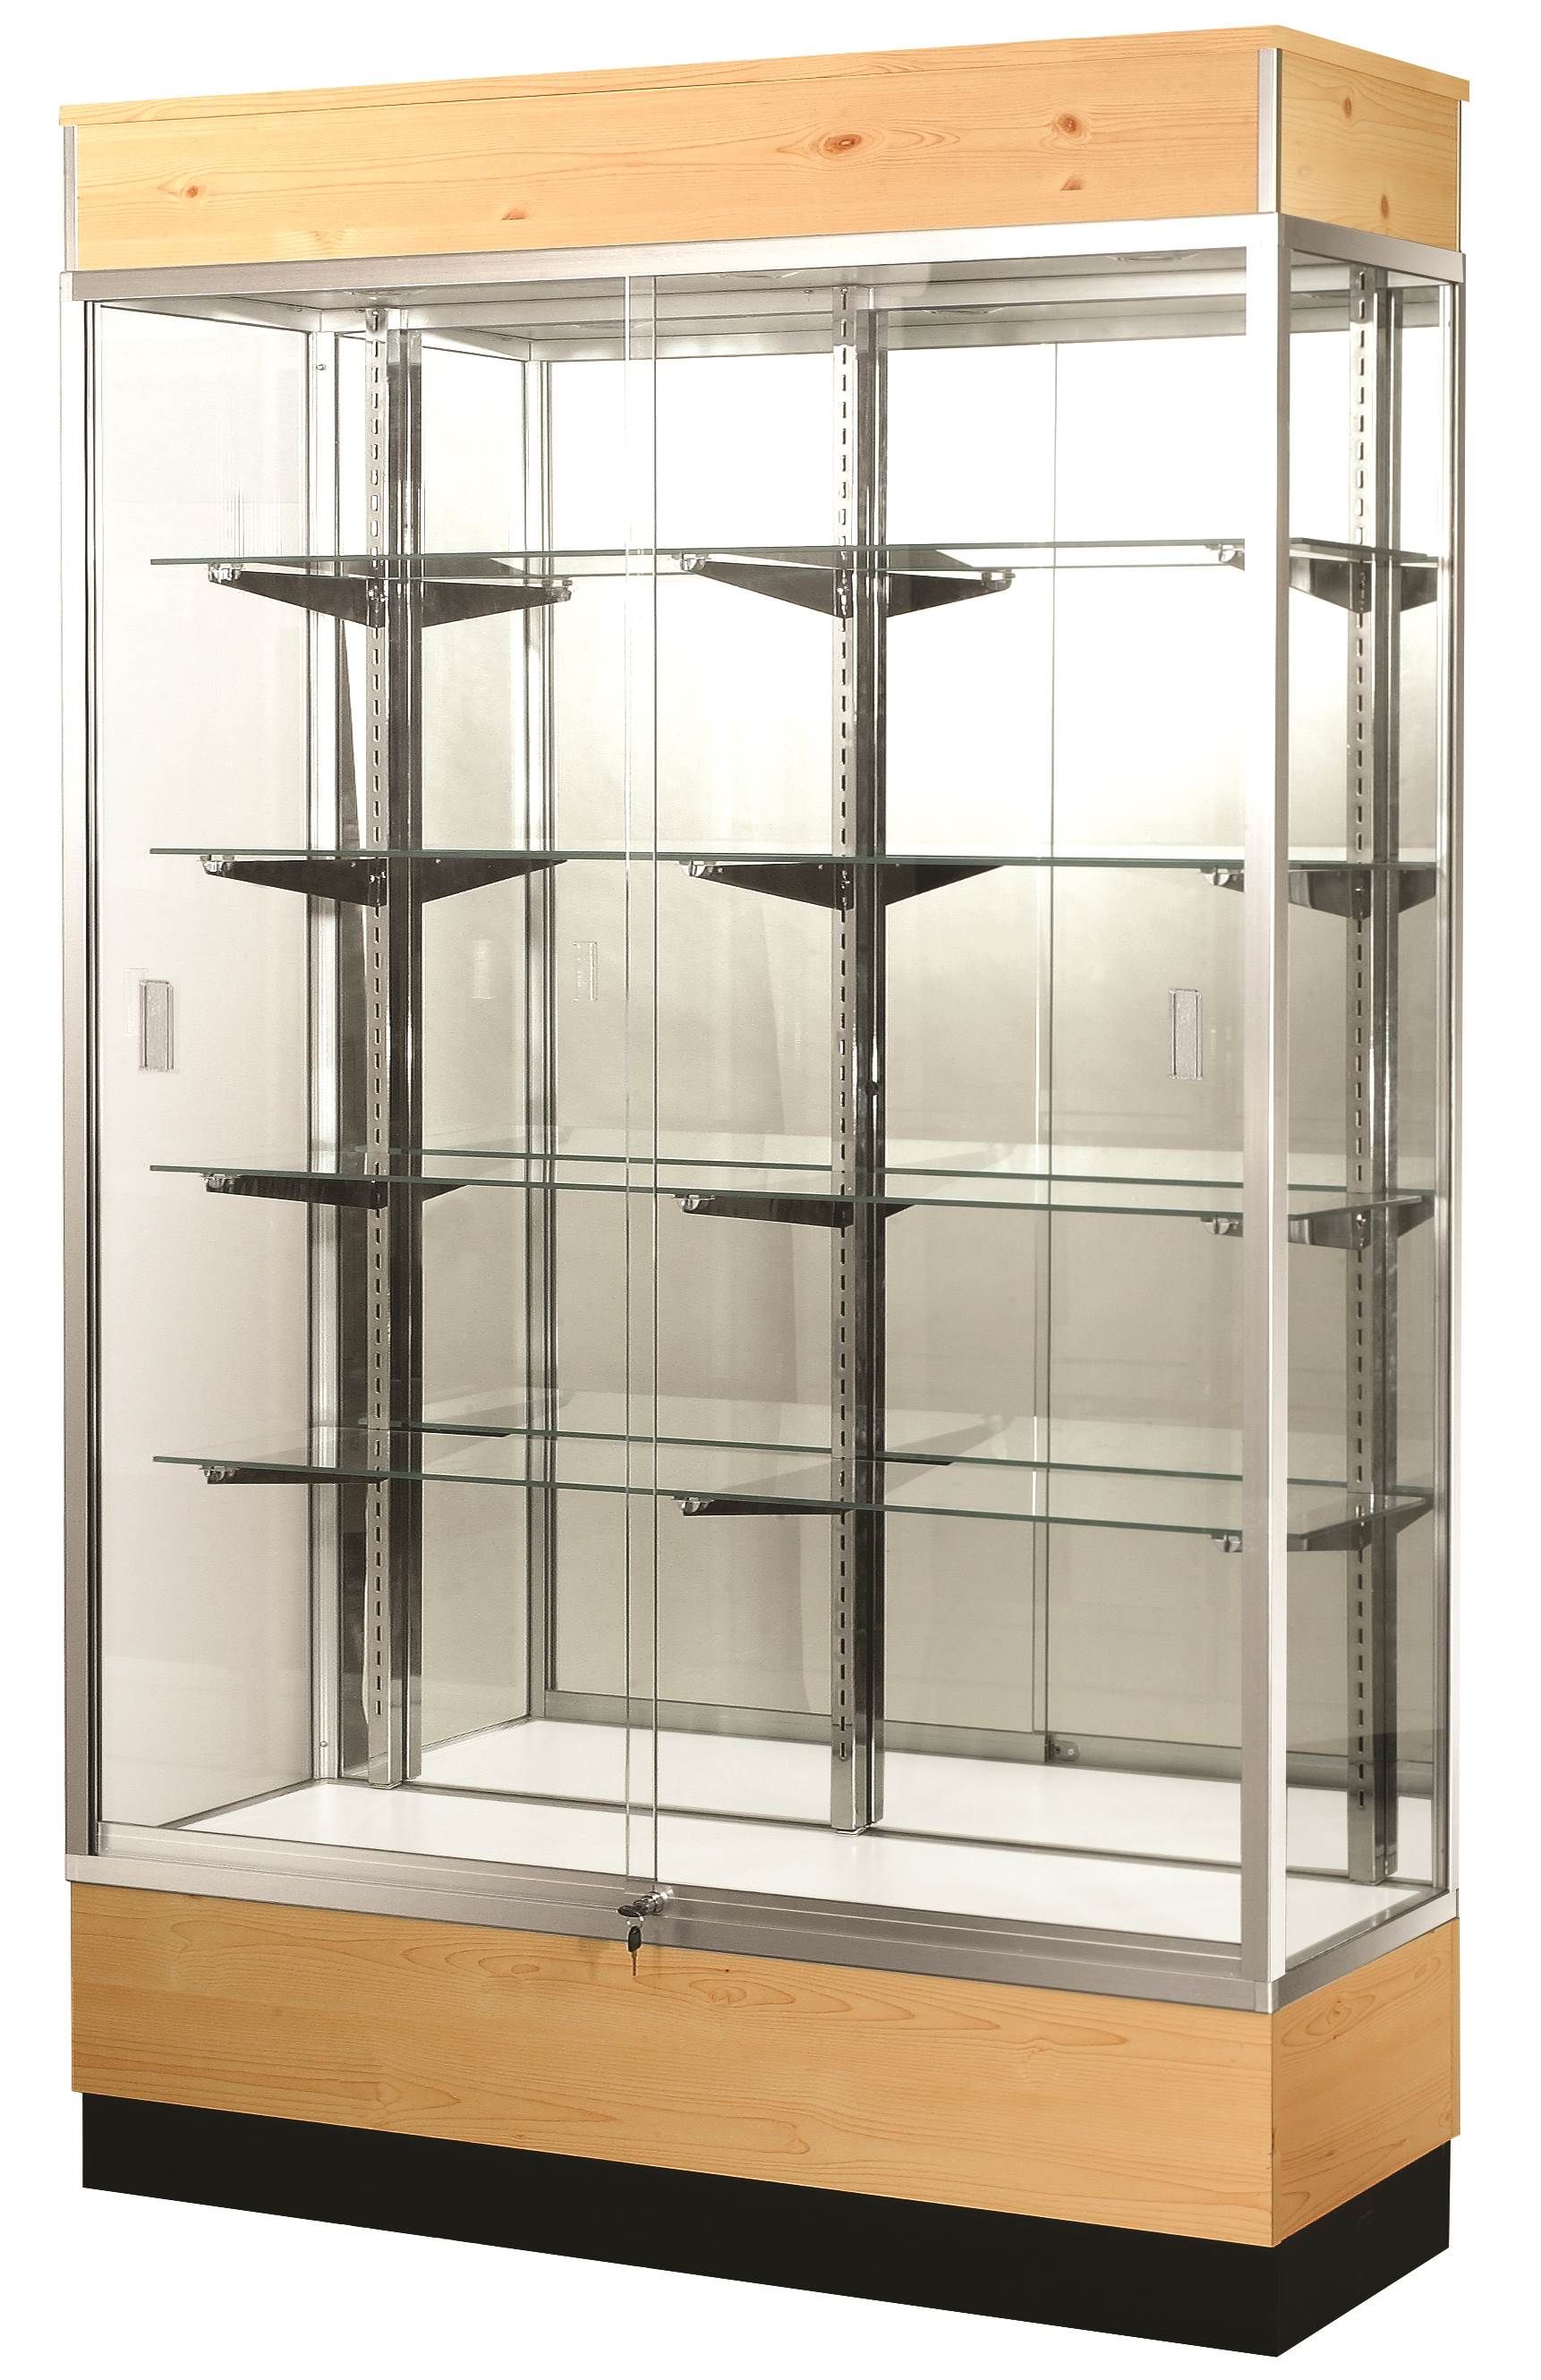 Full Vision Aisle Trophy Glass Display Case Showcase 70 Length The Shop Company